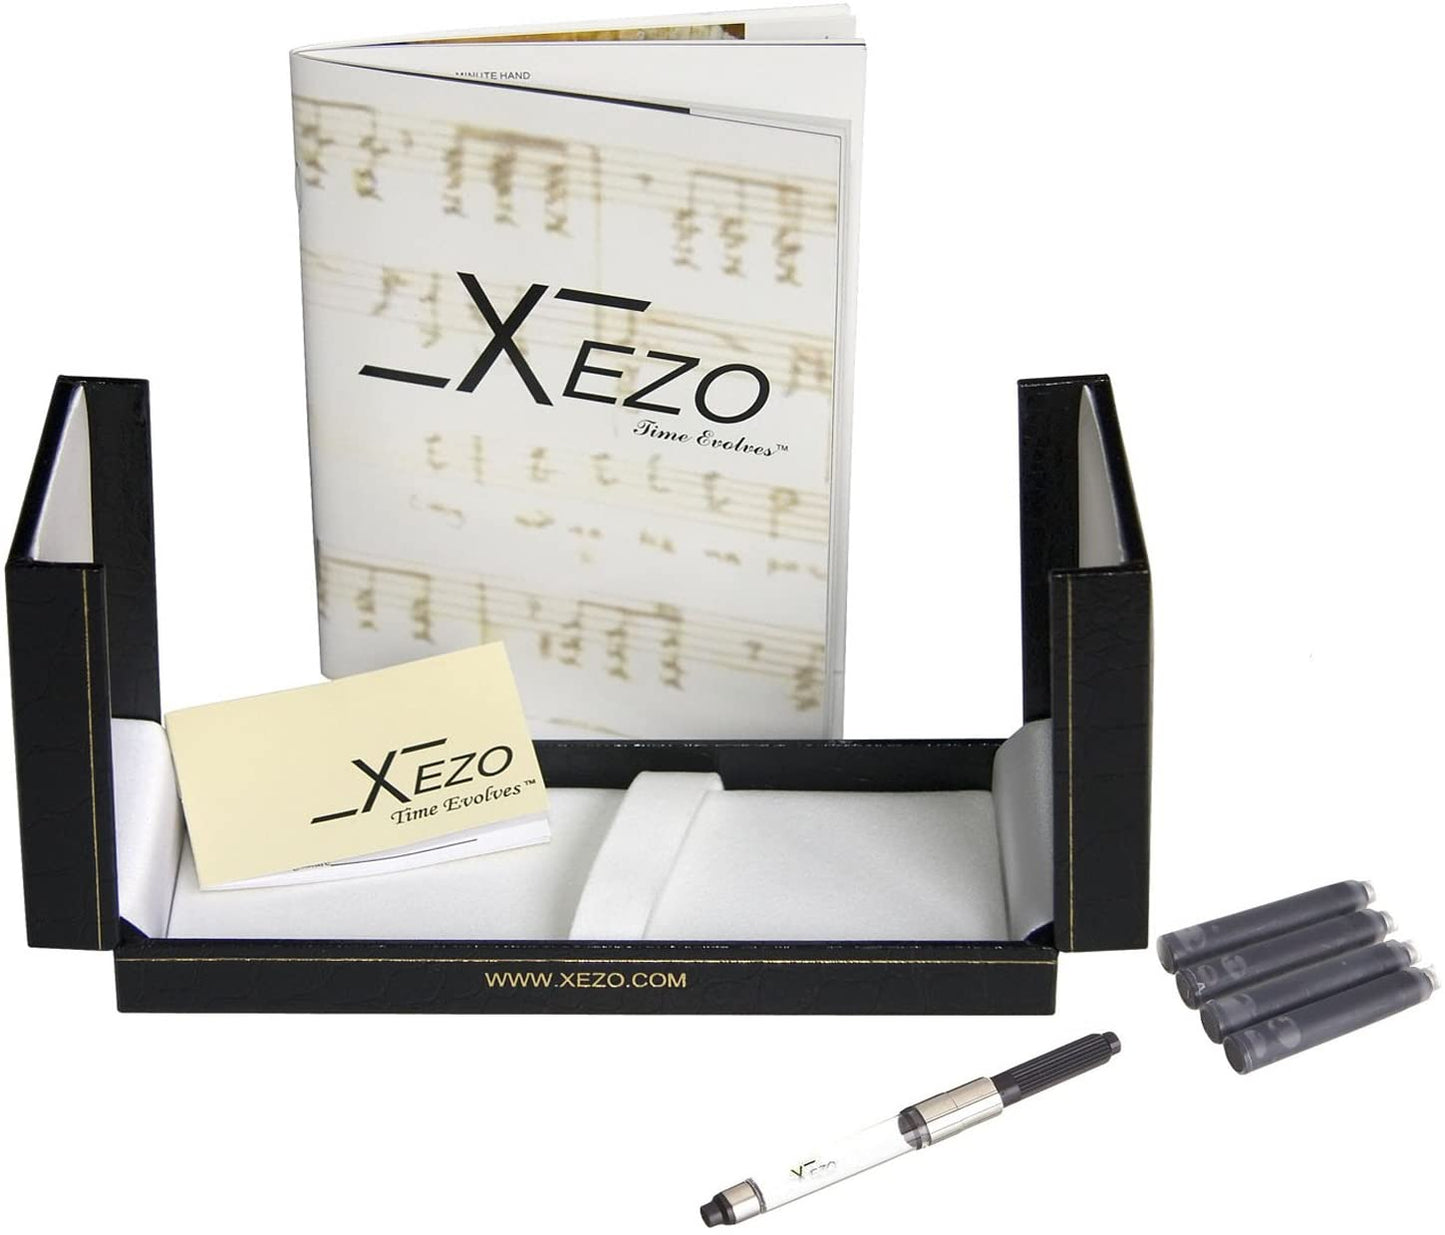 Xezo - Black gift box, certificate, manual, chrome-plated ink converter, and four ink cartridges of the Urbanite II Jazz FM fountain pen